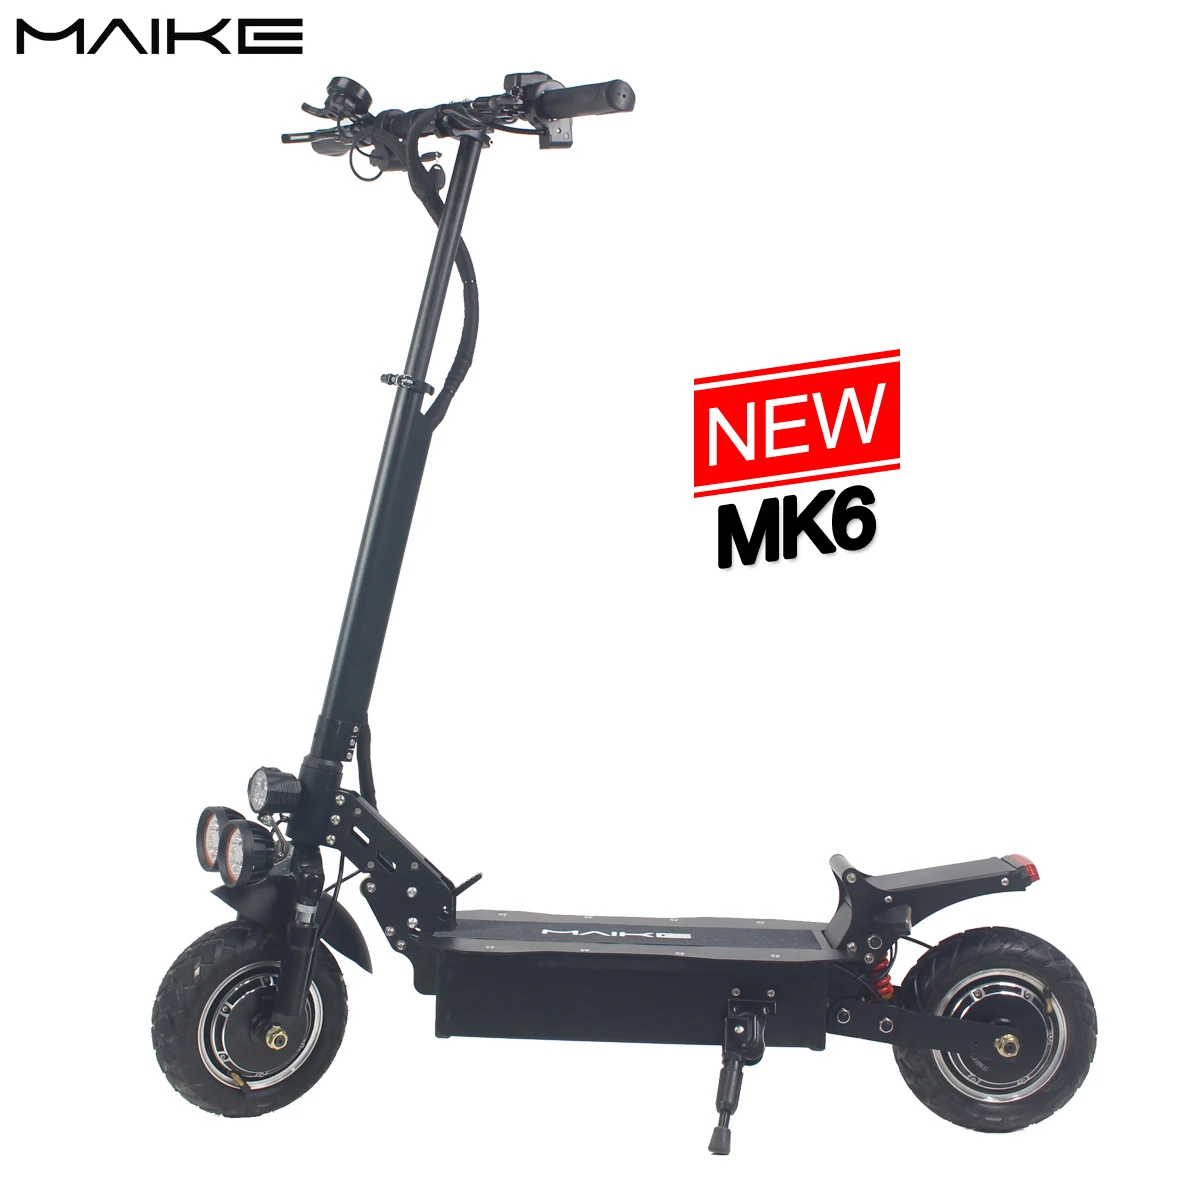 

Wholesale Cheap Price maike mk6 1000w 2000w high power 70km/h 10 inch fat tire e scooter adult electric mobility scooter